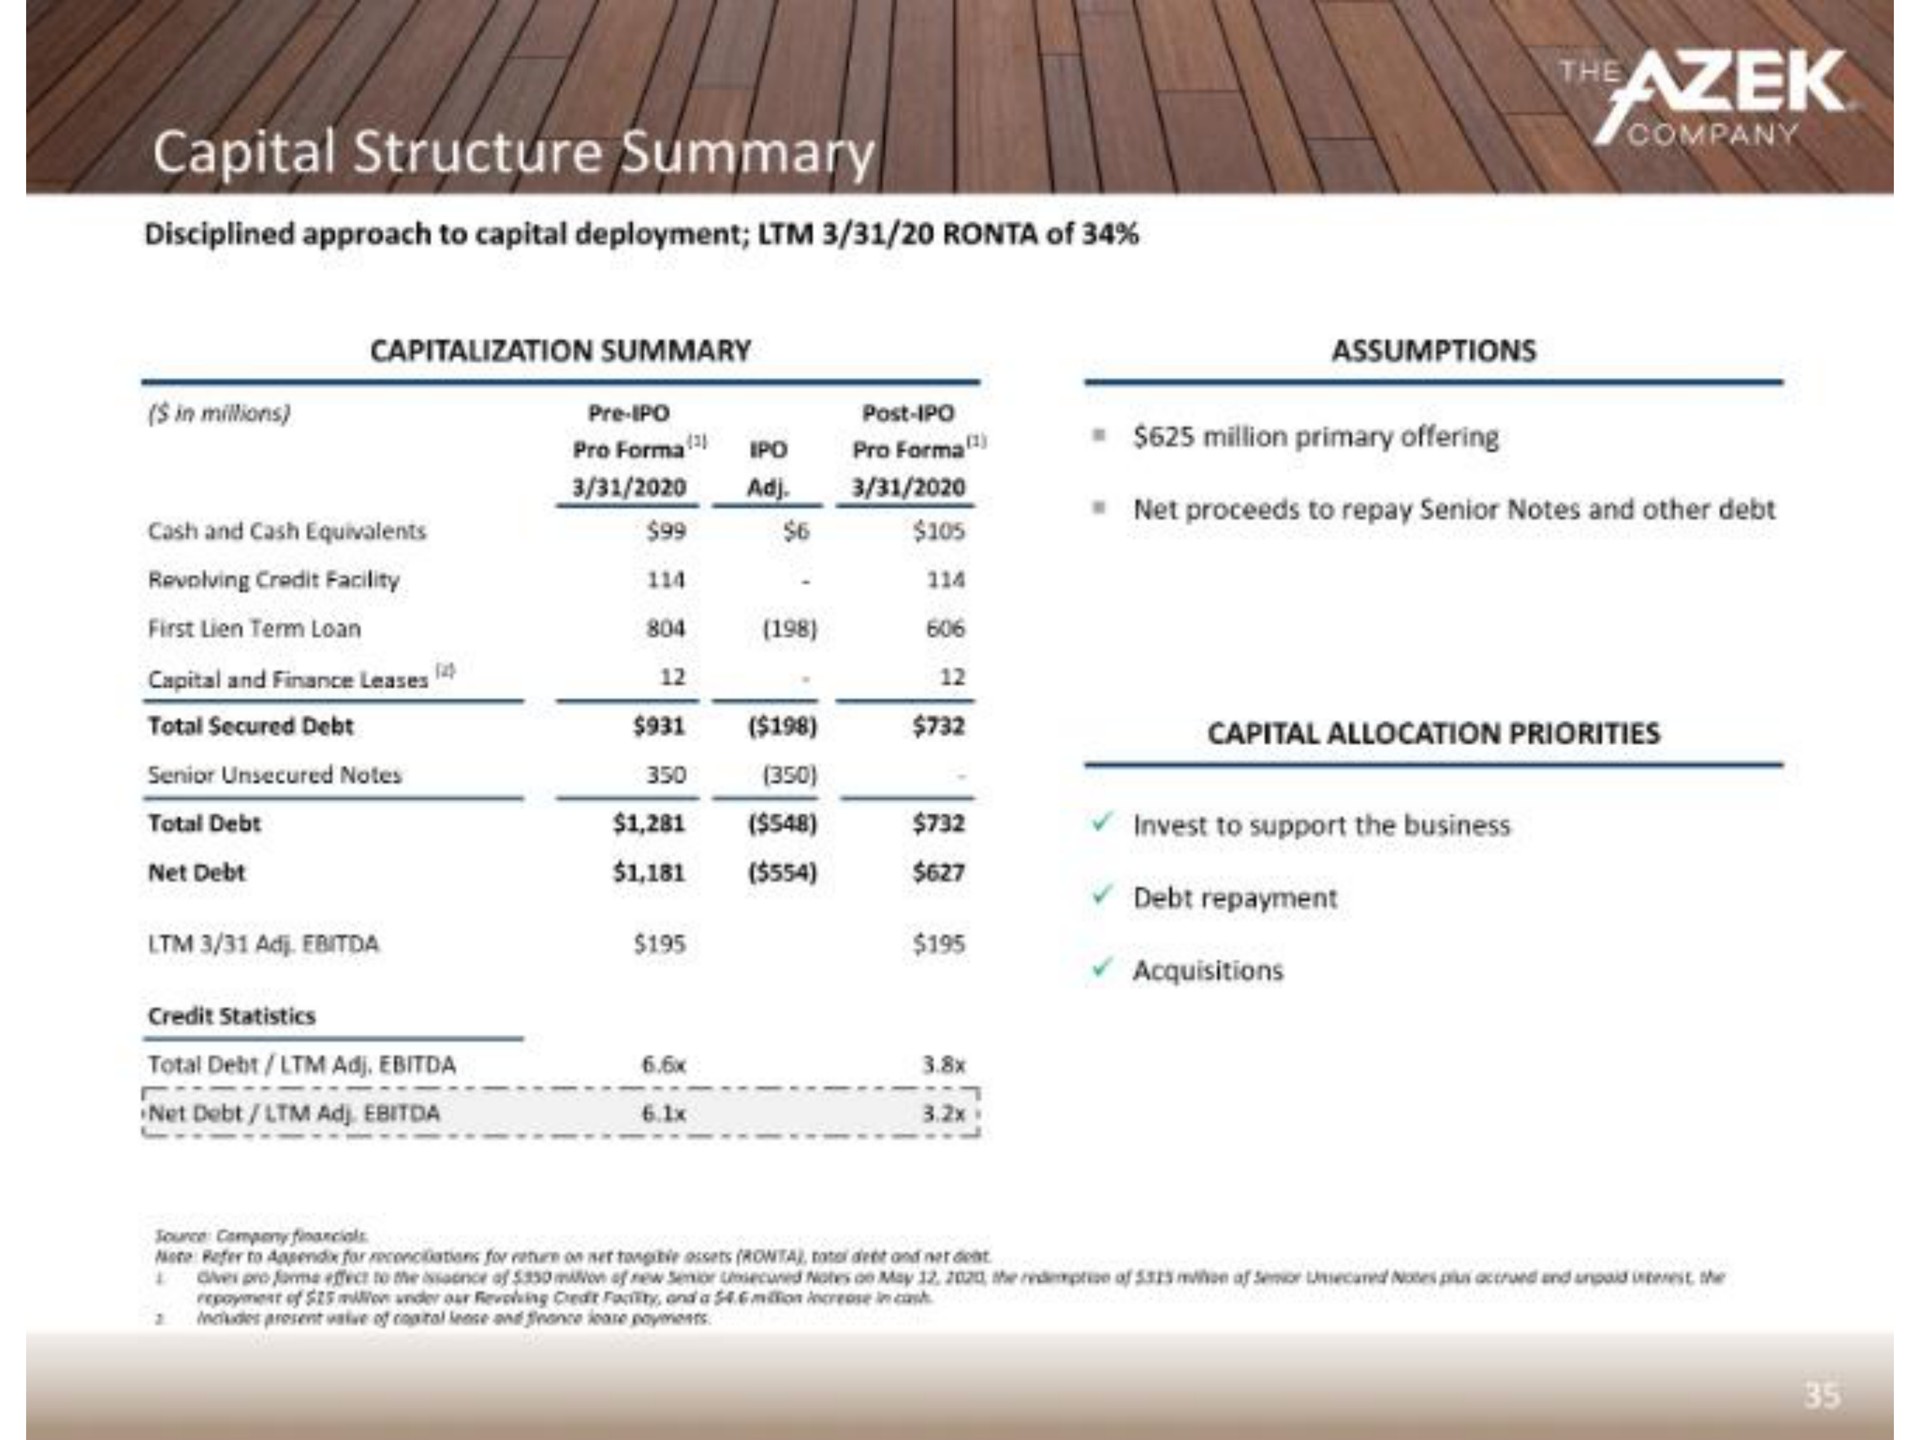 capital structure summary total secured debt capital allocation priorities | Azek